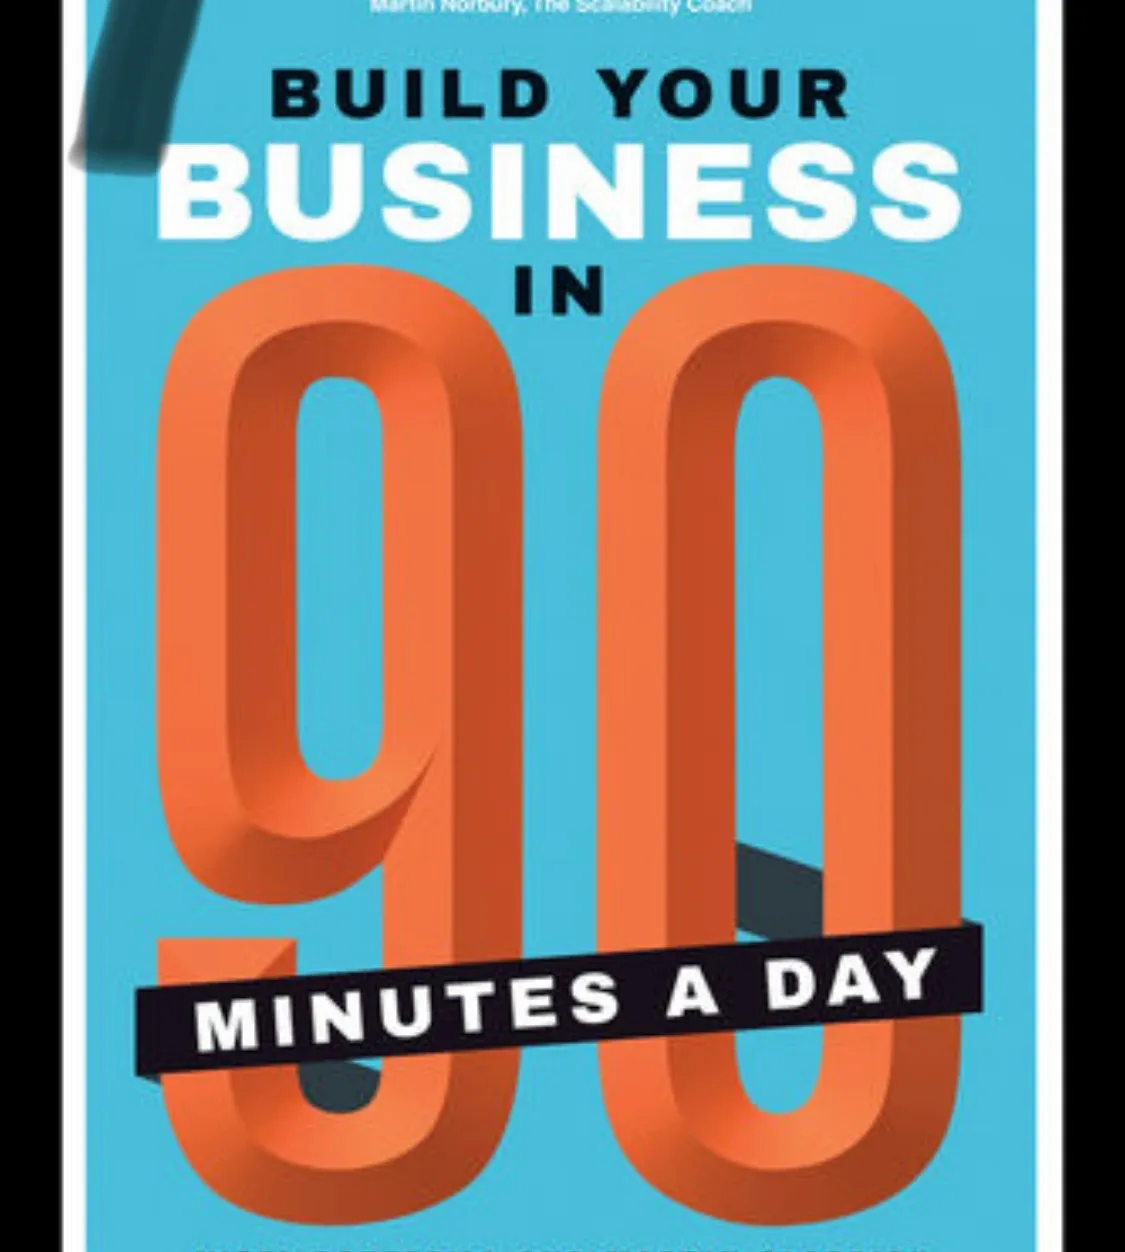 90 Minutes to grow your business